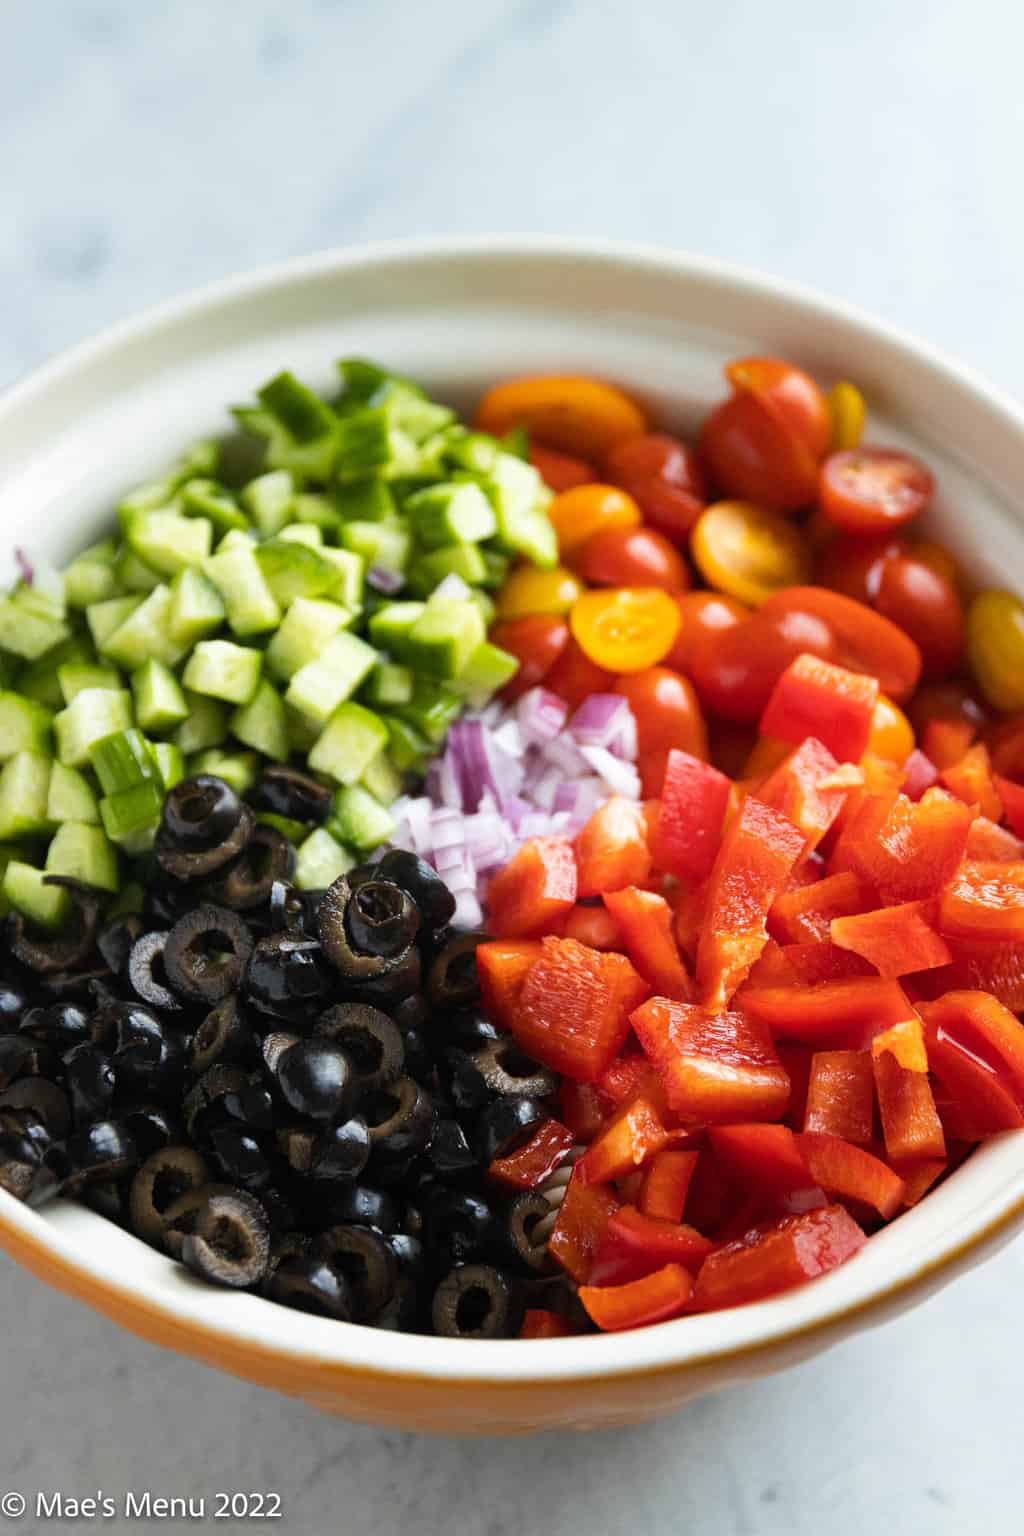 A mixing bowl with diced red peppers, red onion, black olives, cucumber, and halved cherry tomatoes.